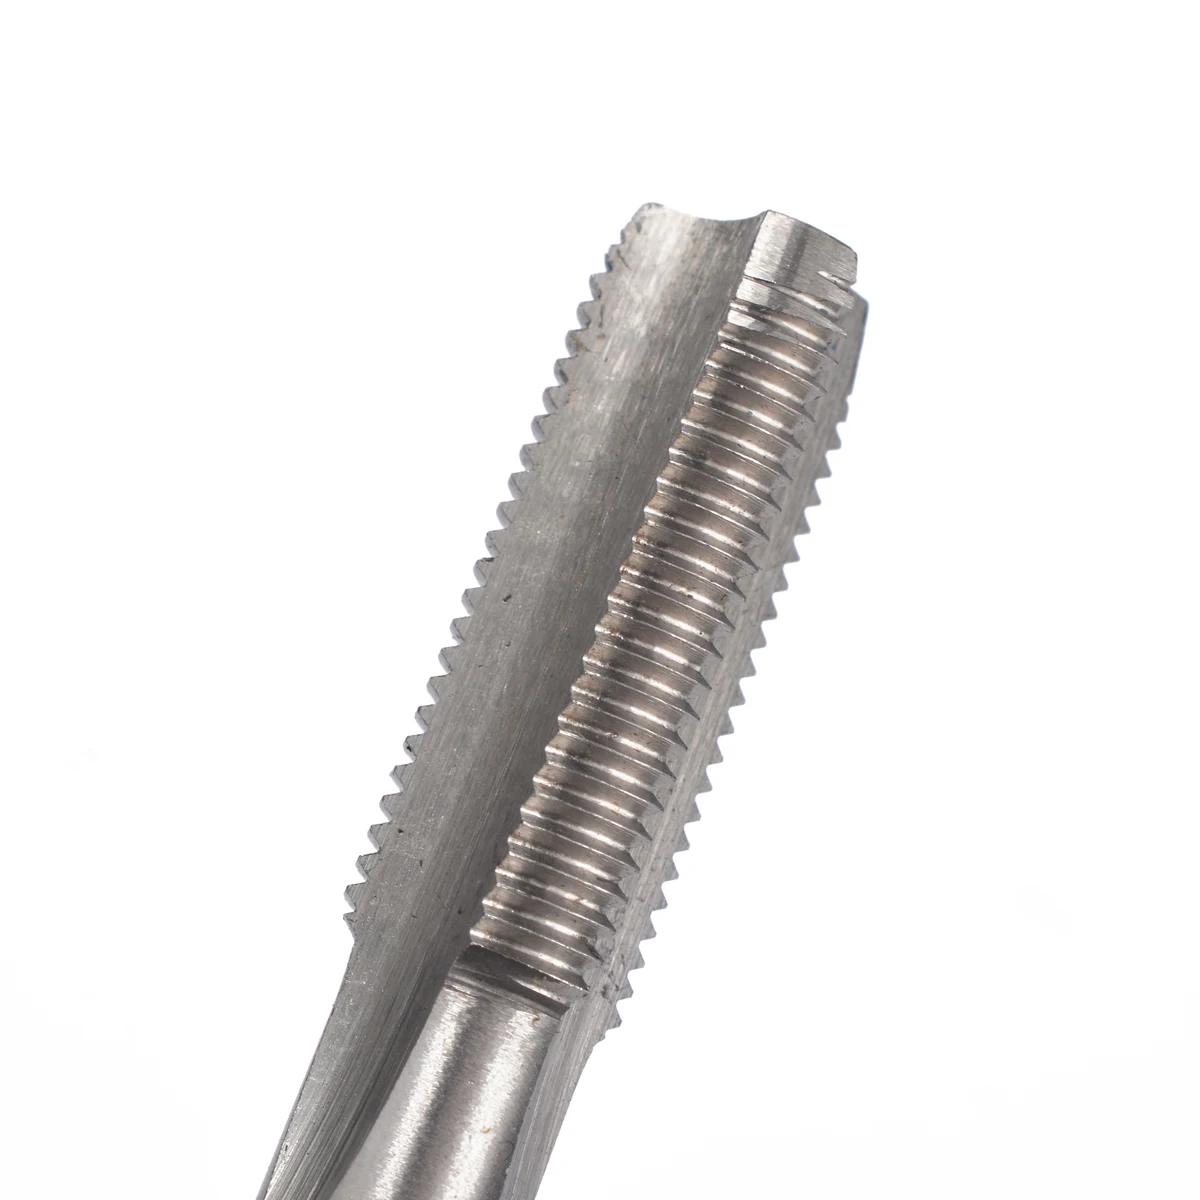 Details about   New 27 x 1mm Metric Taper & Plug Tap Right Hand Thread M27 x 1mm Pitch 